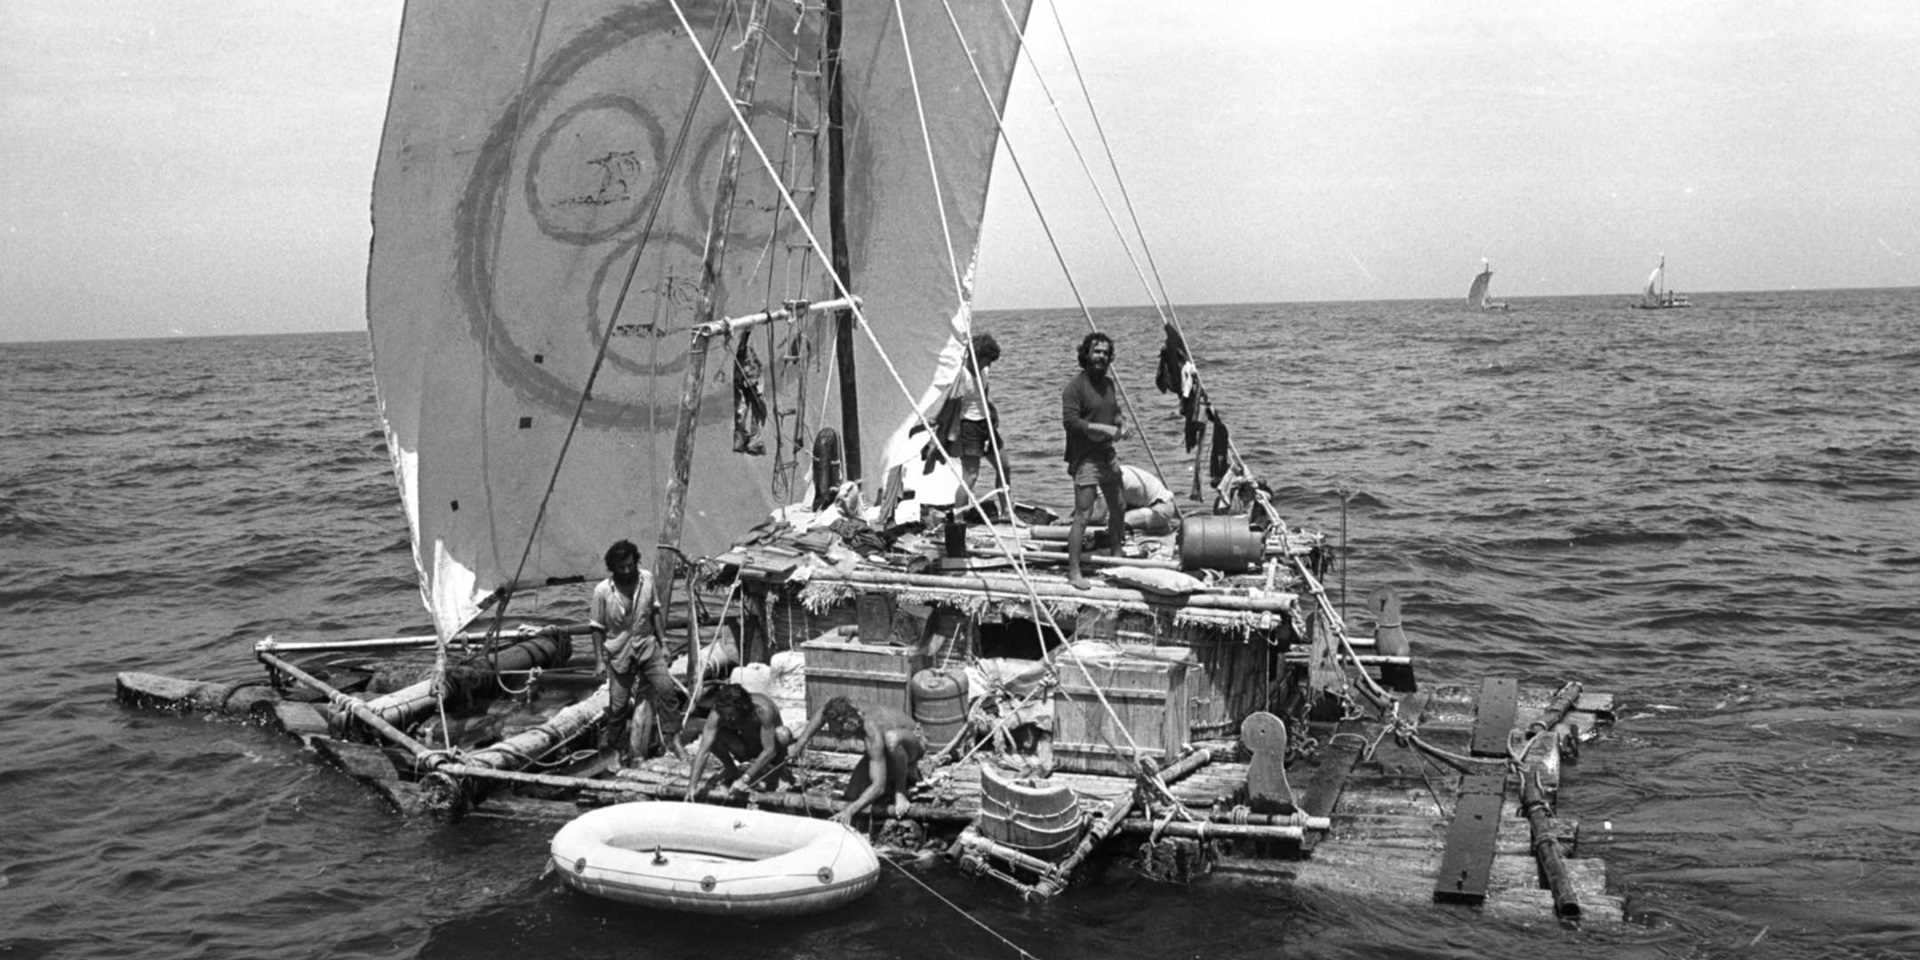 One of the Las Balsas rafts at sea, with the other two rafts in the background, 1973. Photograph by John Carnemolla. Image reproduced courtesy Ballina Naval & Maritime Museum